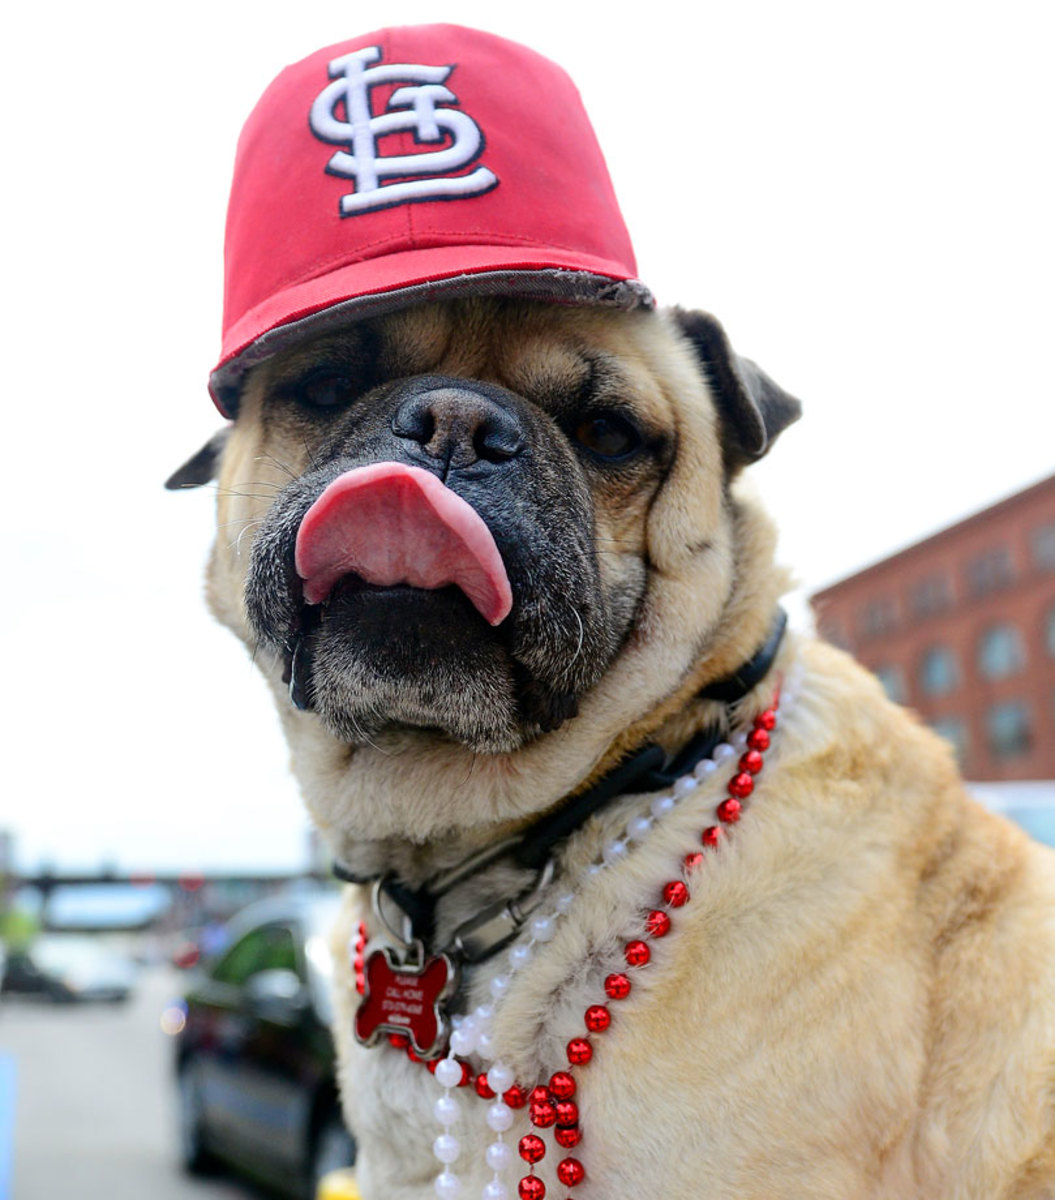 St-Louis-Cardinals-dog-GettyImages-470145636.jpg